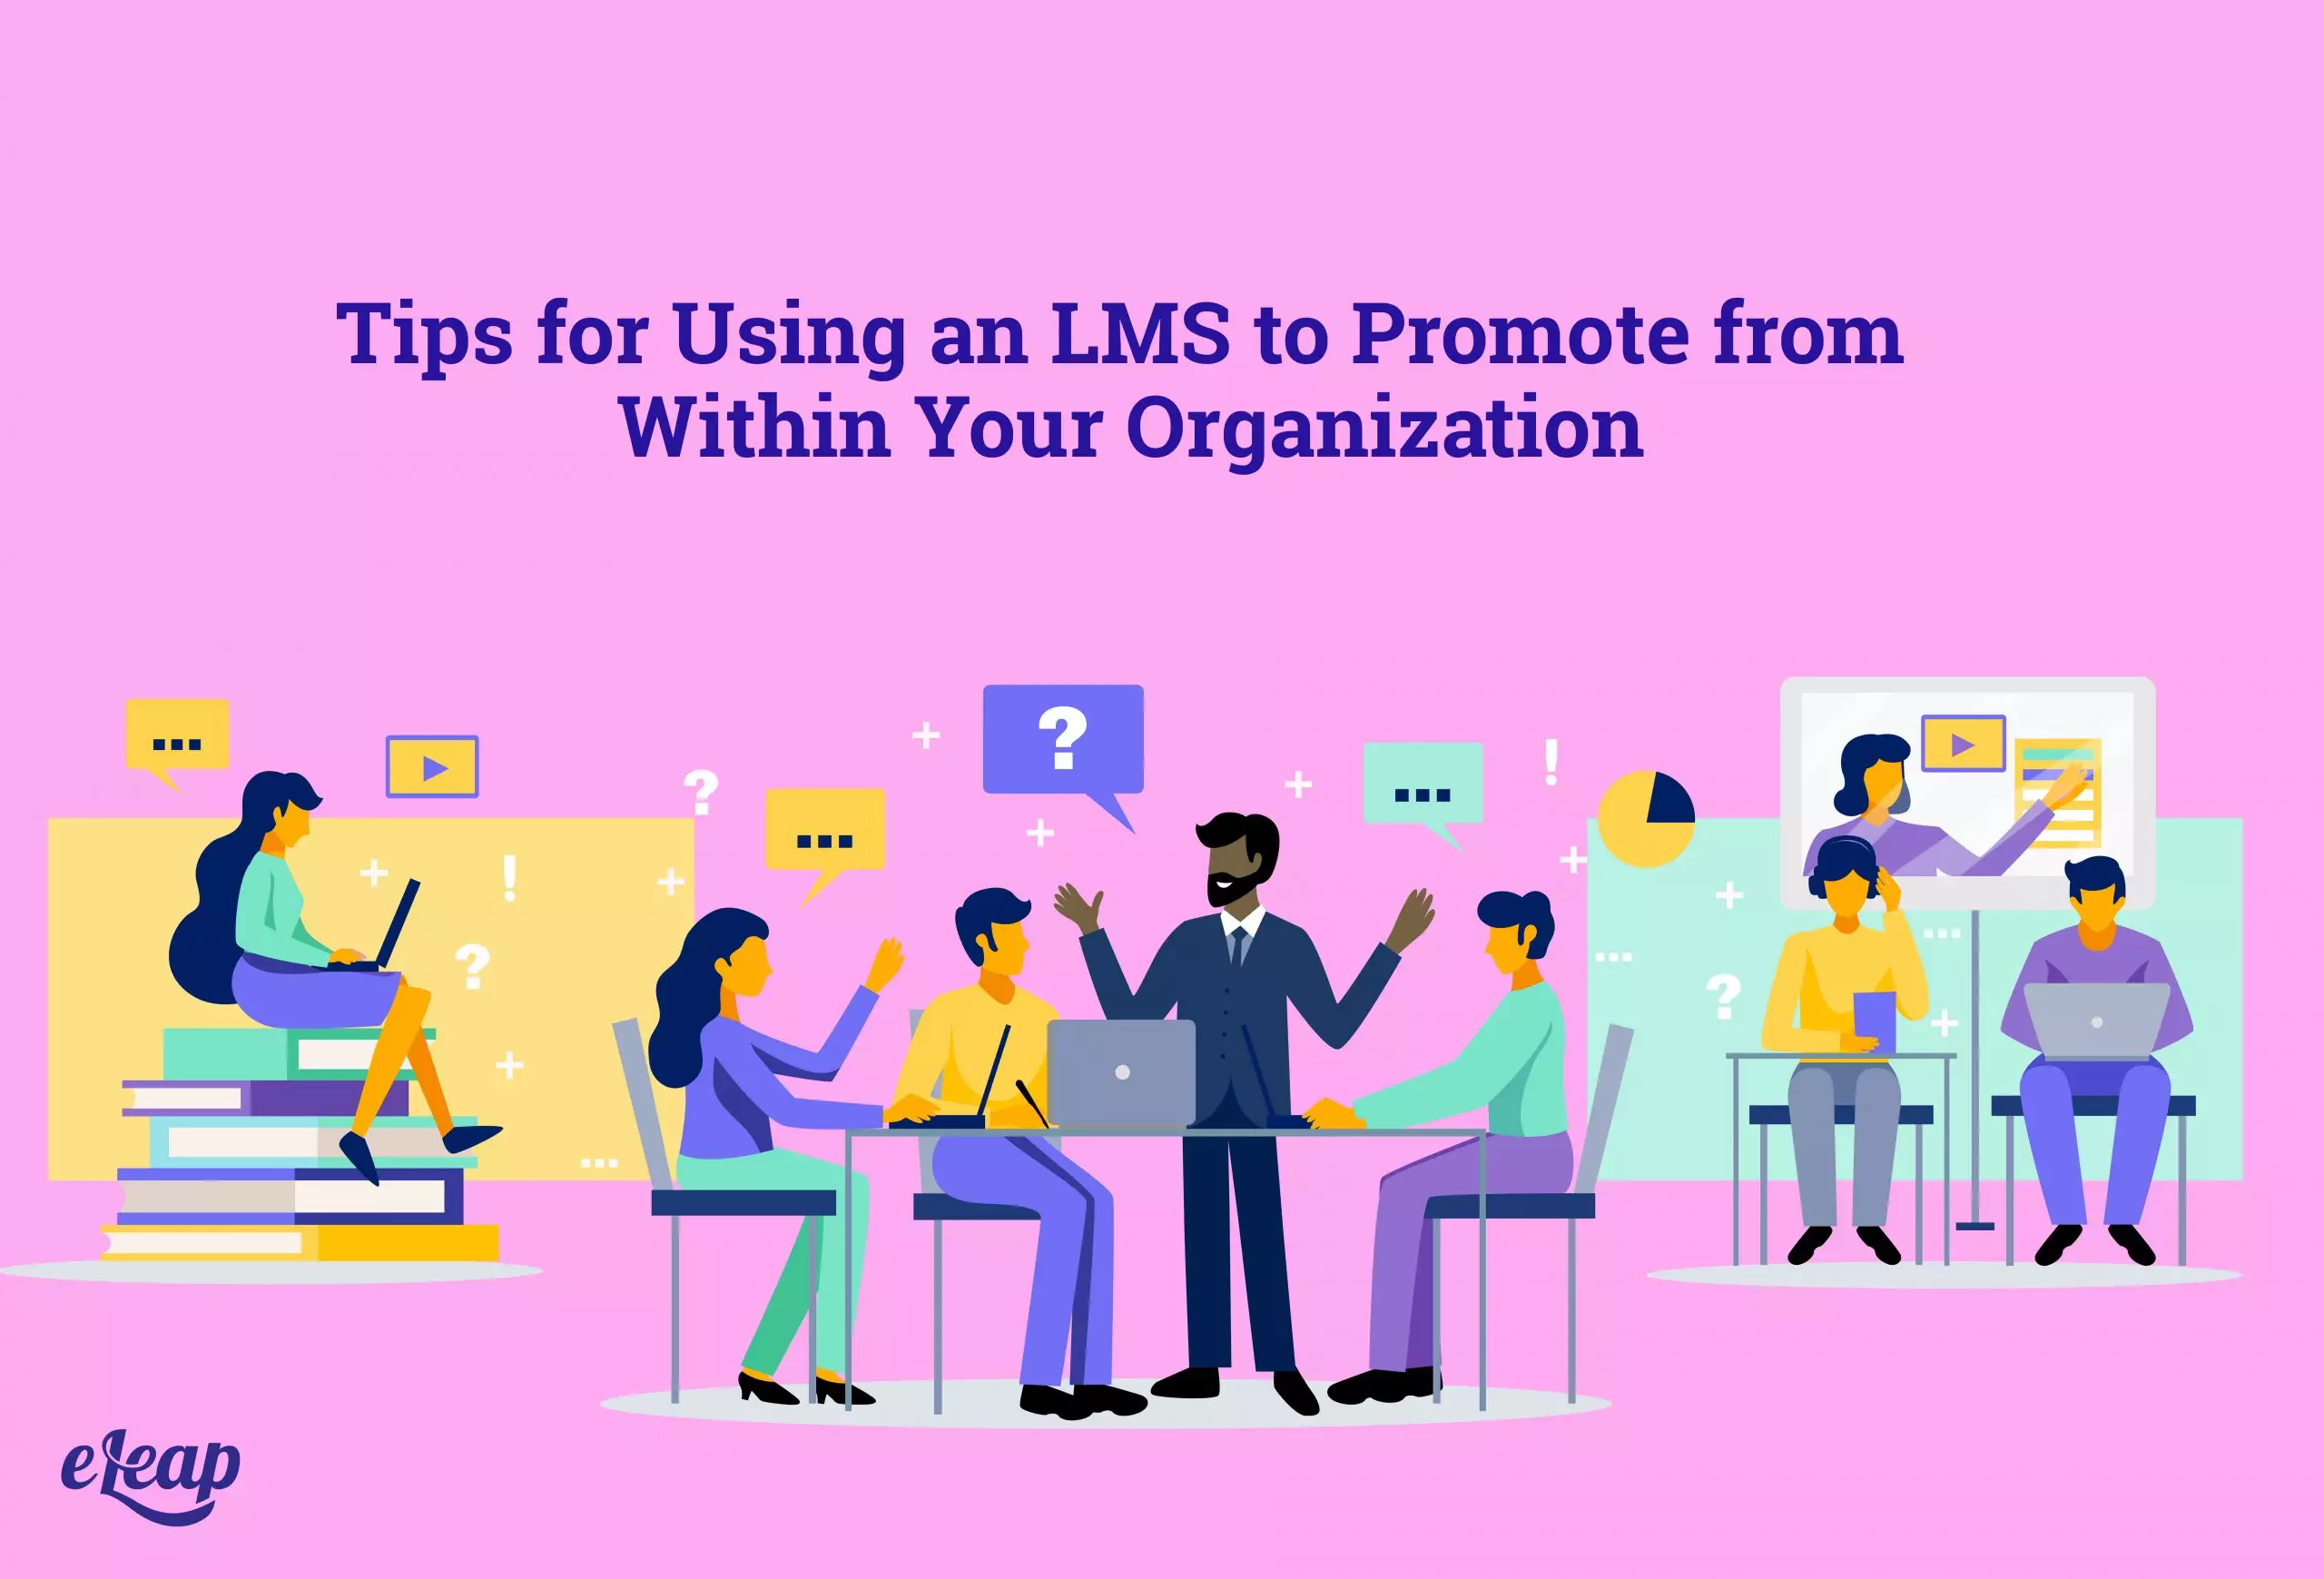 Tips for Using an LMS to Promote from Within Your Organization